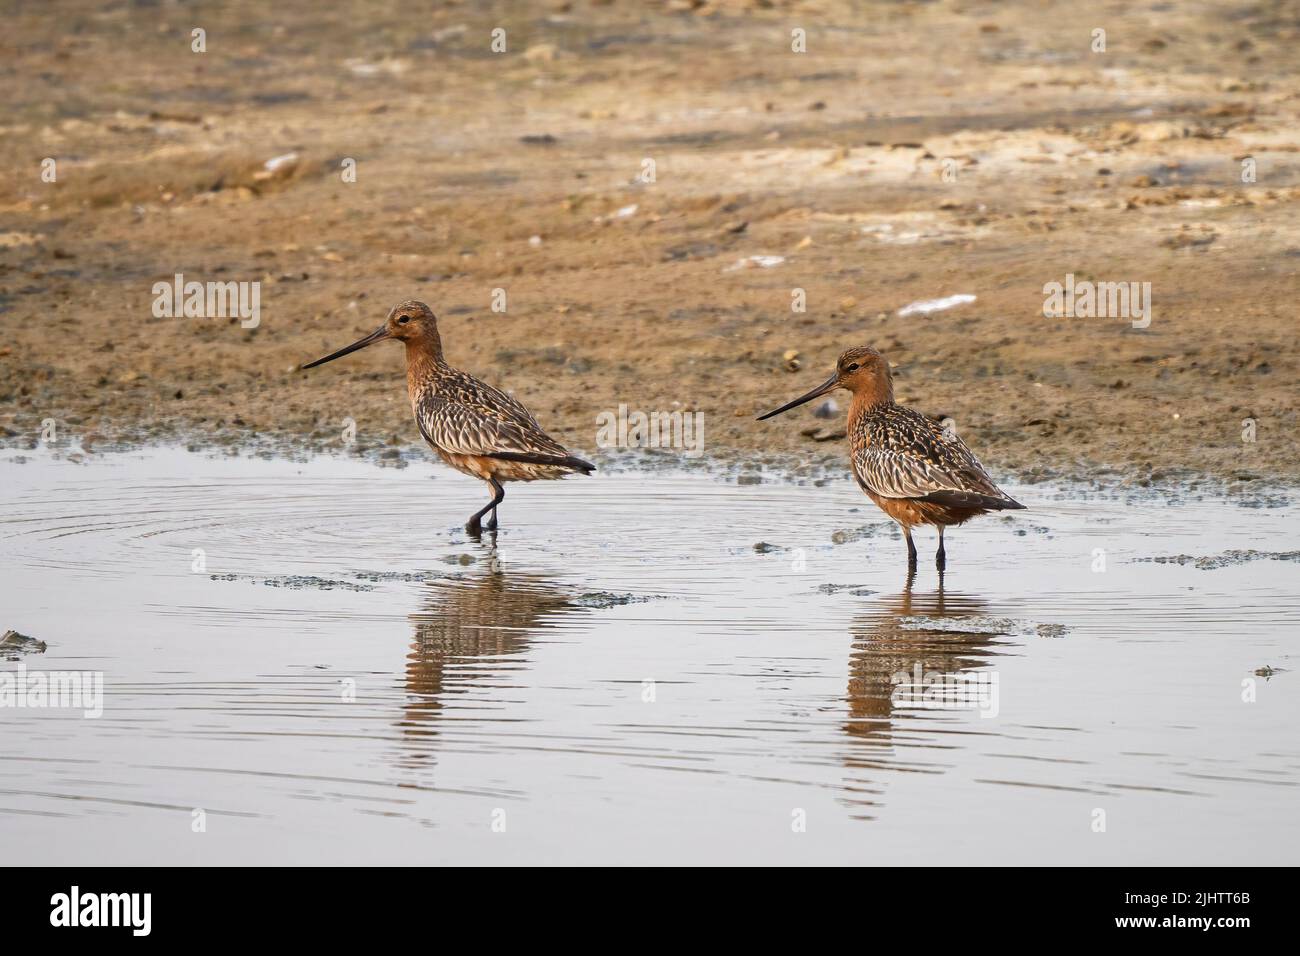 A pair of bar-tailed godwits (Limosa lapponica) in the Beddington Farmlands nature reserve in Sutton, London. Stock Photo